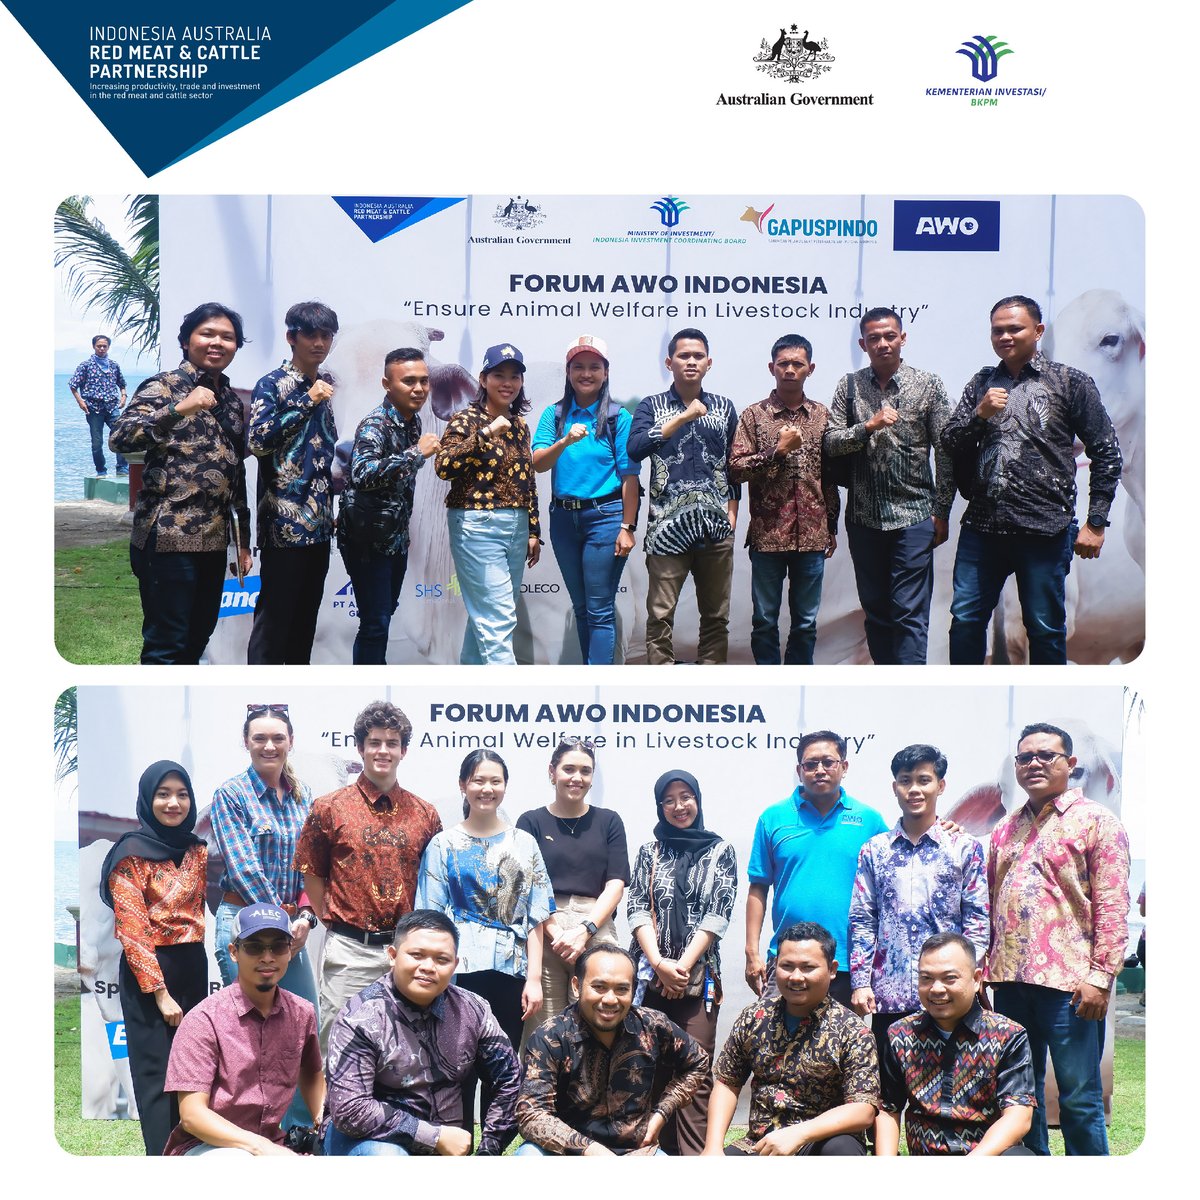 that the program to ensure the implementation of animal welfare standards in the cattle breeding sector in Indonesia to sustain.
#InvestinMeat #RedMeatCattle #iaredmeatcattle #redmeatcattlepartnership #australiaindonesia #foodsecurity #Connectingindonesianfarmers